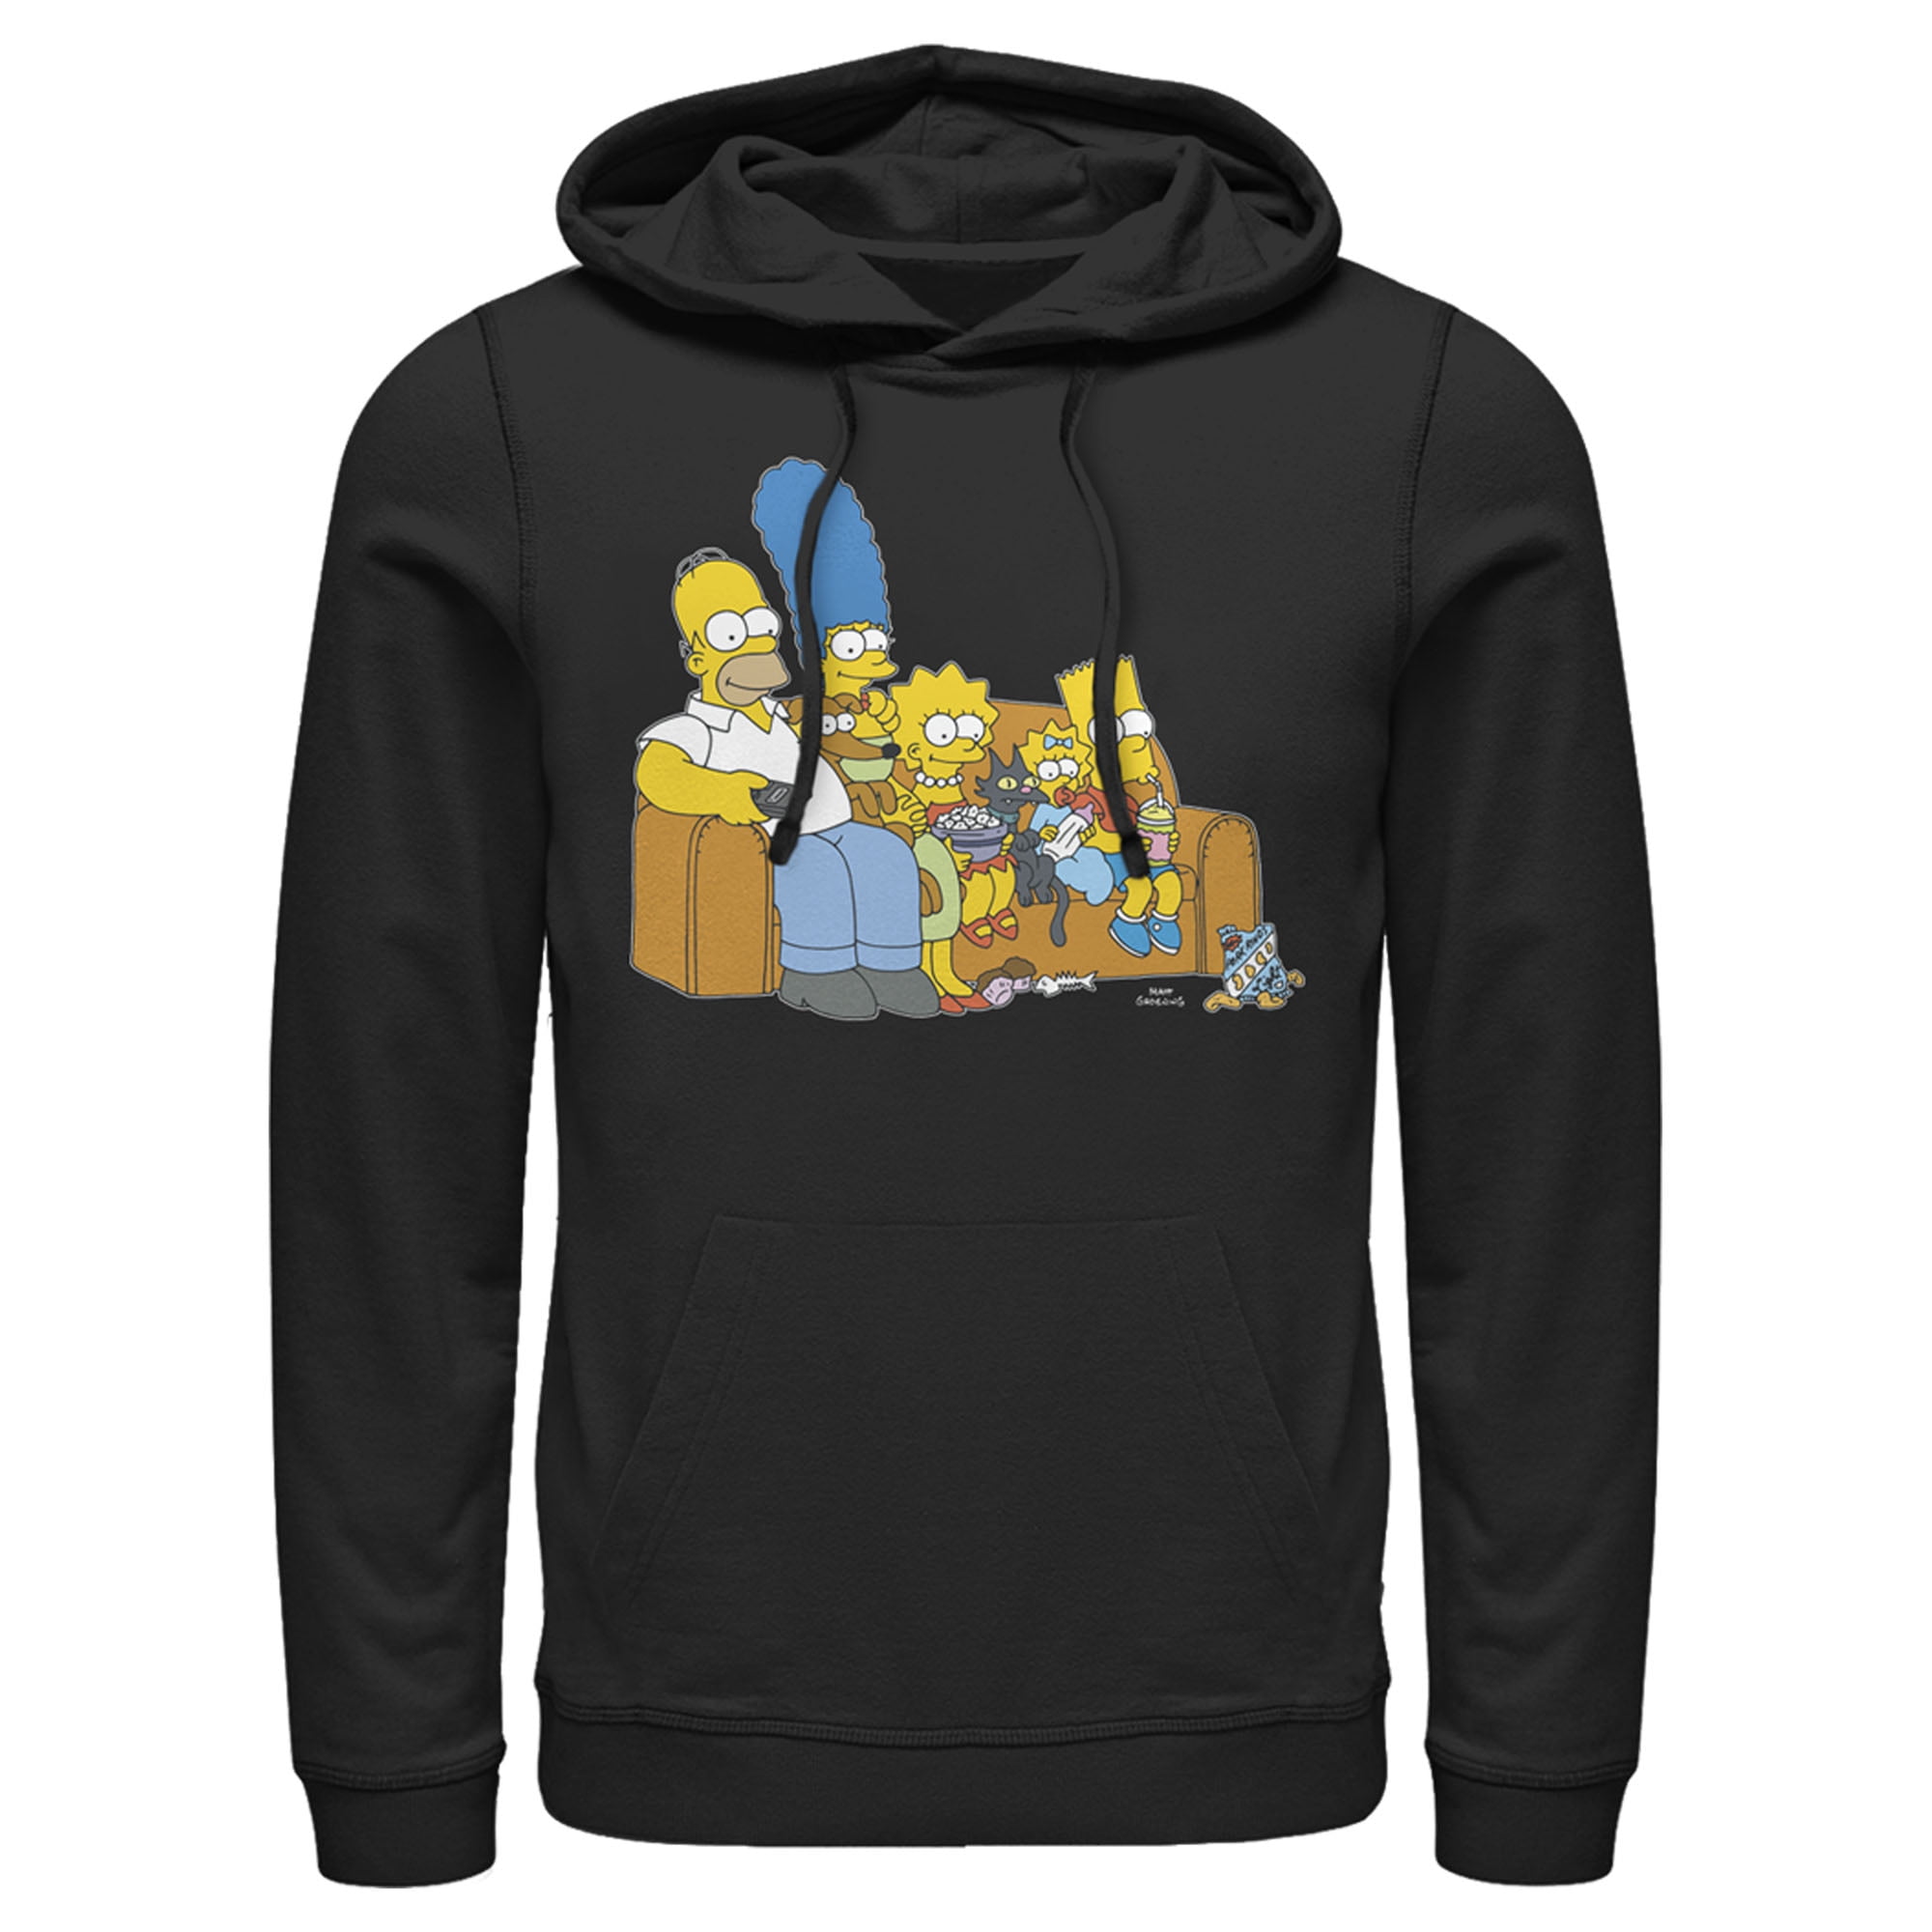 Bart Simpson And Family Hoodie Novelty Cool Sweatshirt Jumper Pullover V339 